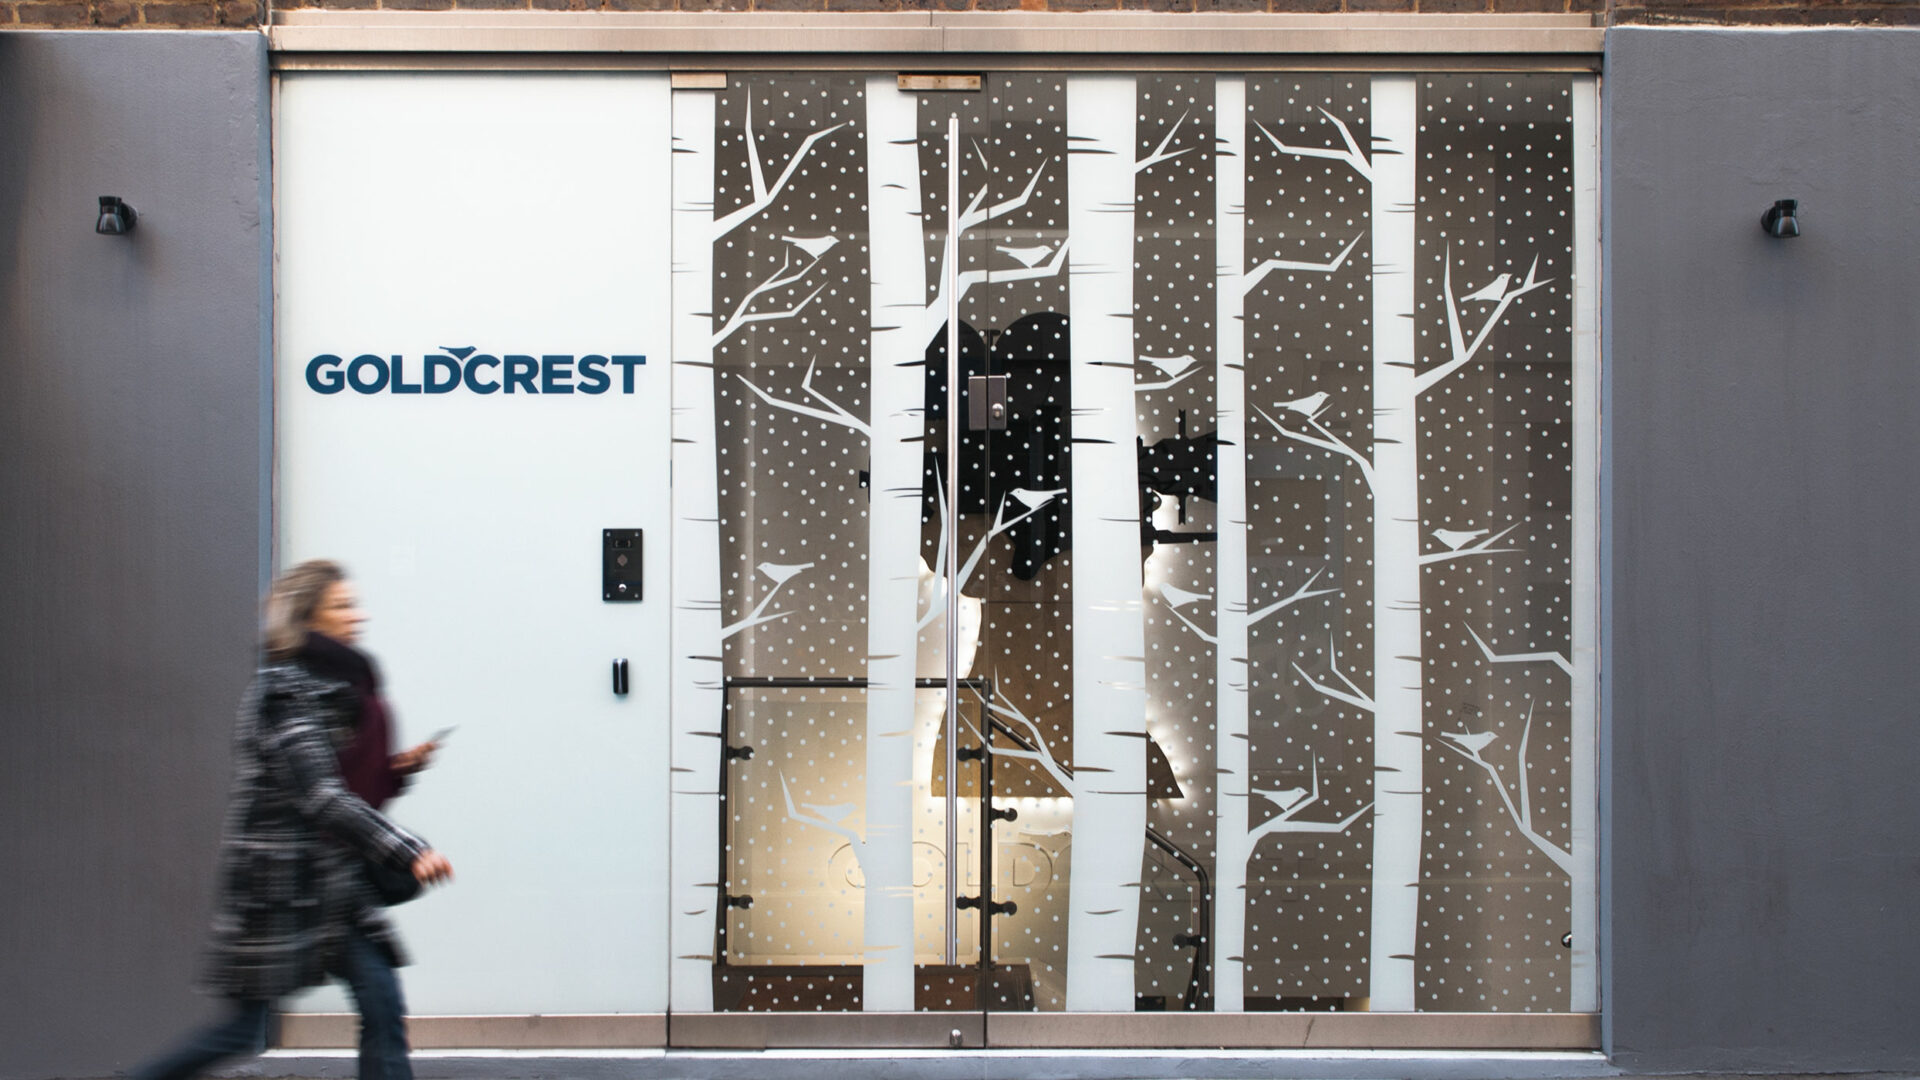 Street view Goldcrest film with passers by Christmas festive window graphics print and installation